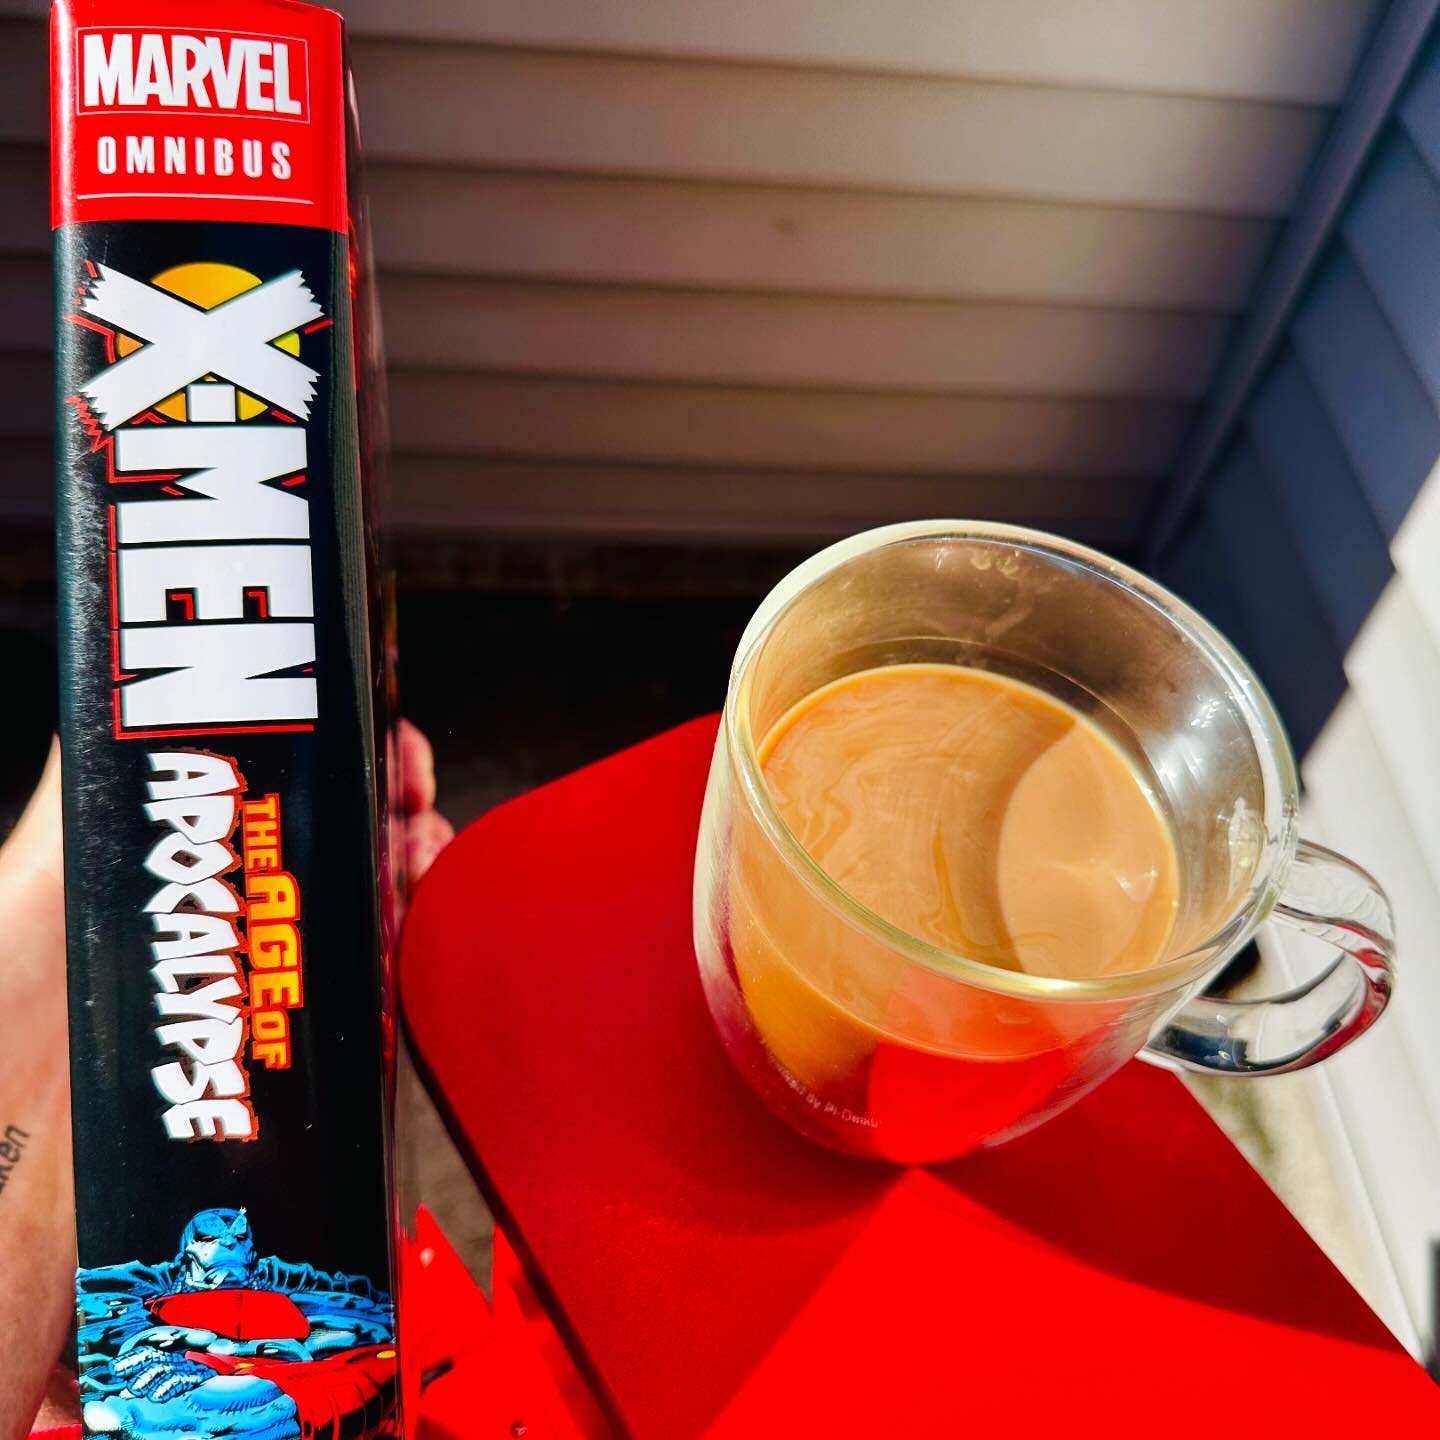 A wee bit of light reading to kick off this sunny Saturday morning. ☕️☀️
#TheAgeOfApocalypse #ComicsAndCoffee 
@marvel